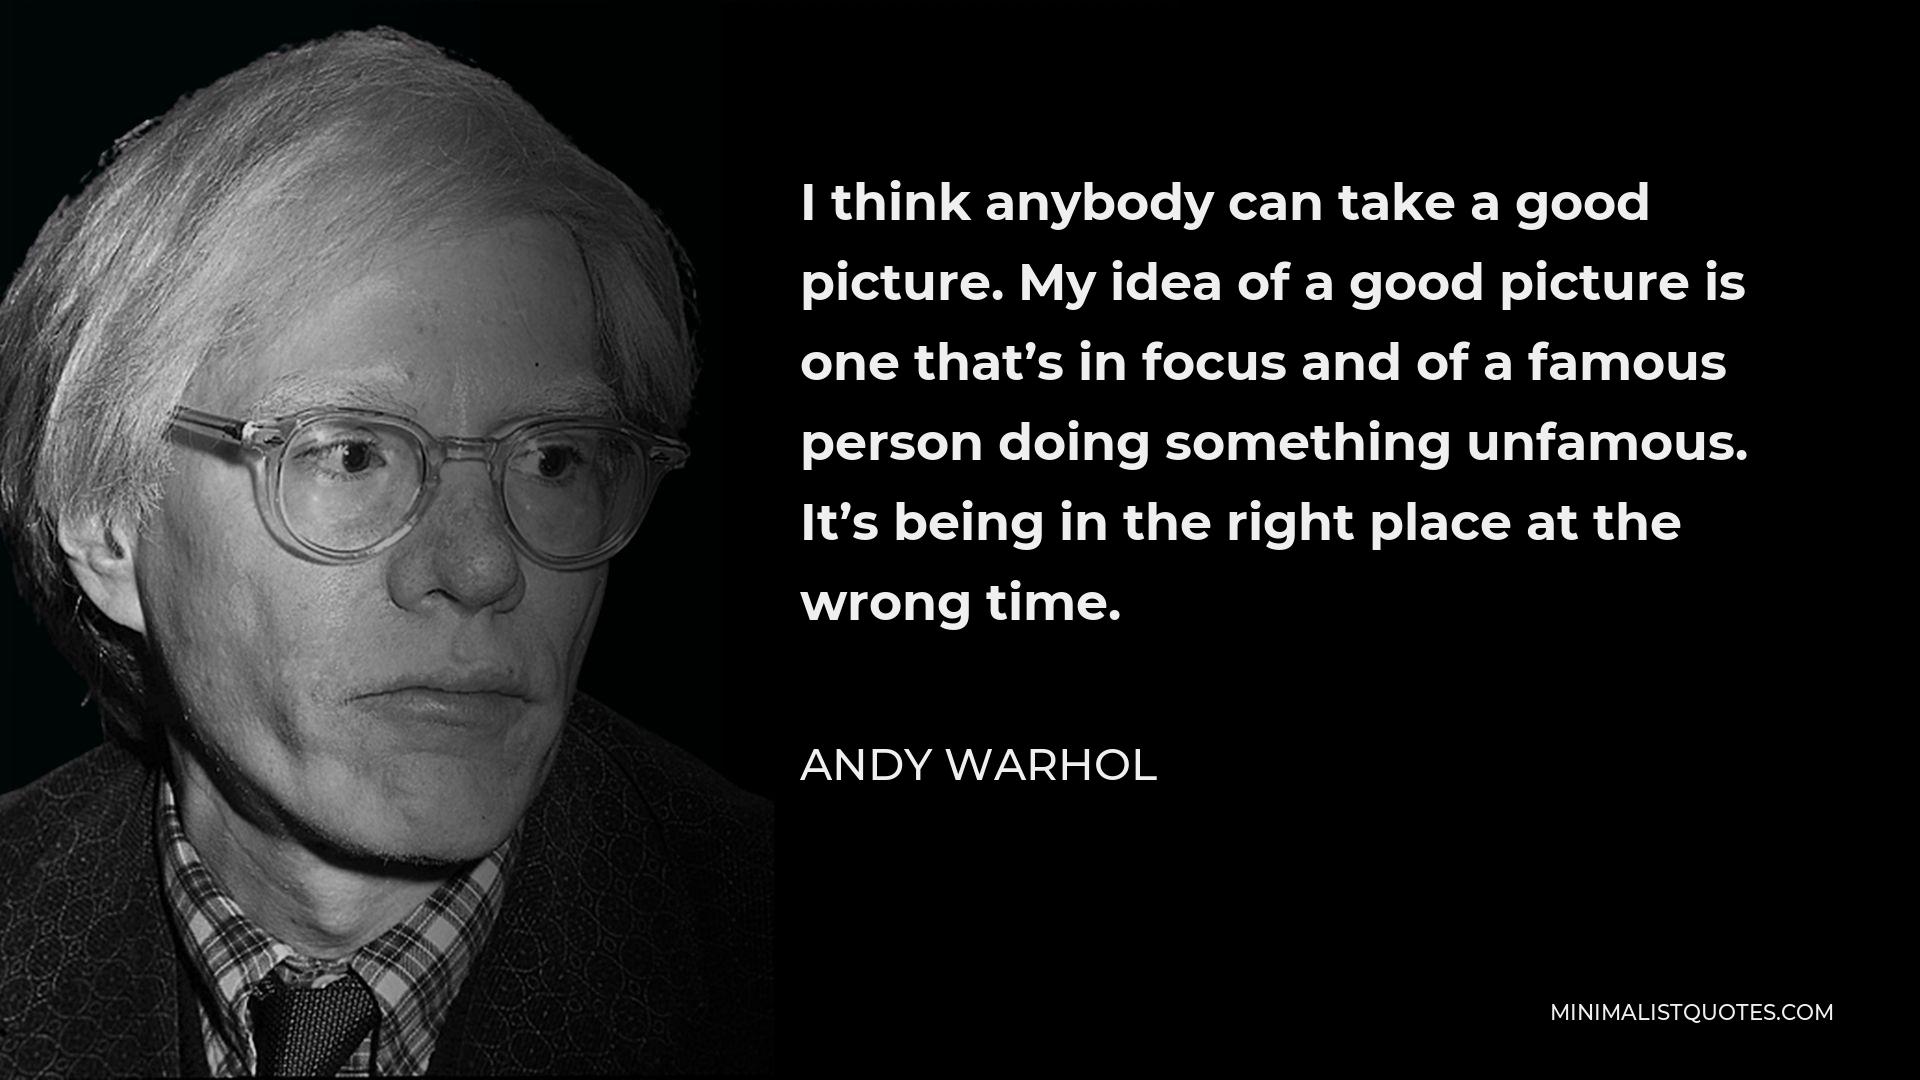 Andy Warhol Quote - I think anybody can take a good picture. My idea of a good picture is one that’s in focus and of a famous person doing something unfamous. It’s being in the right place at the wrong time.